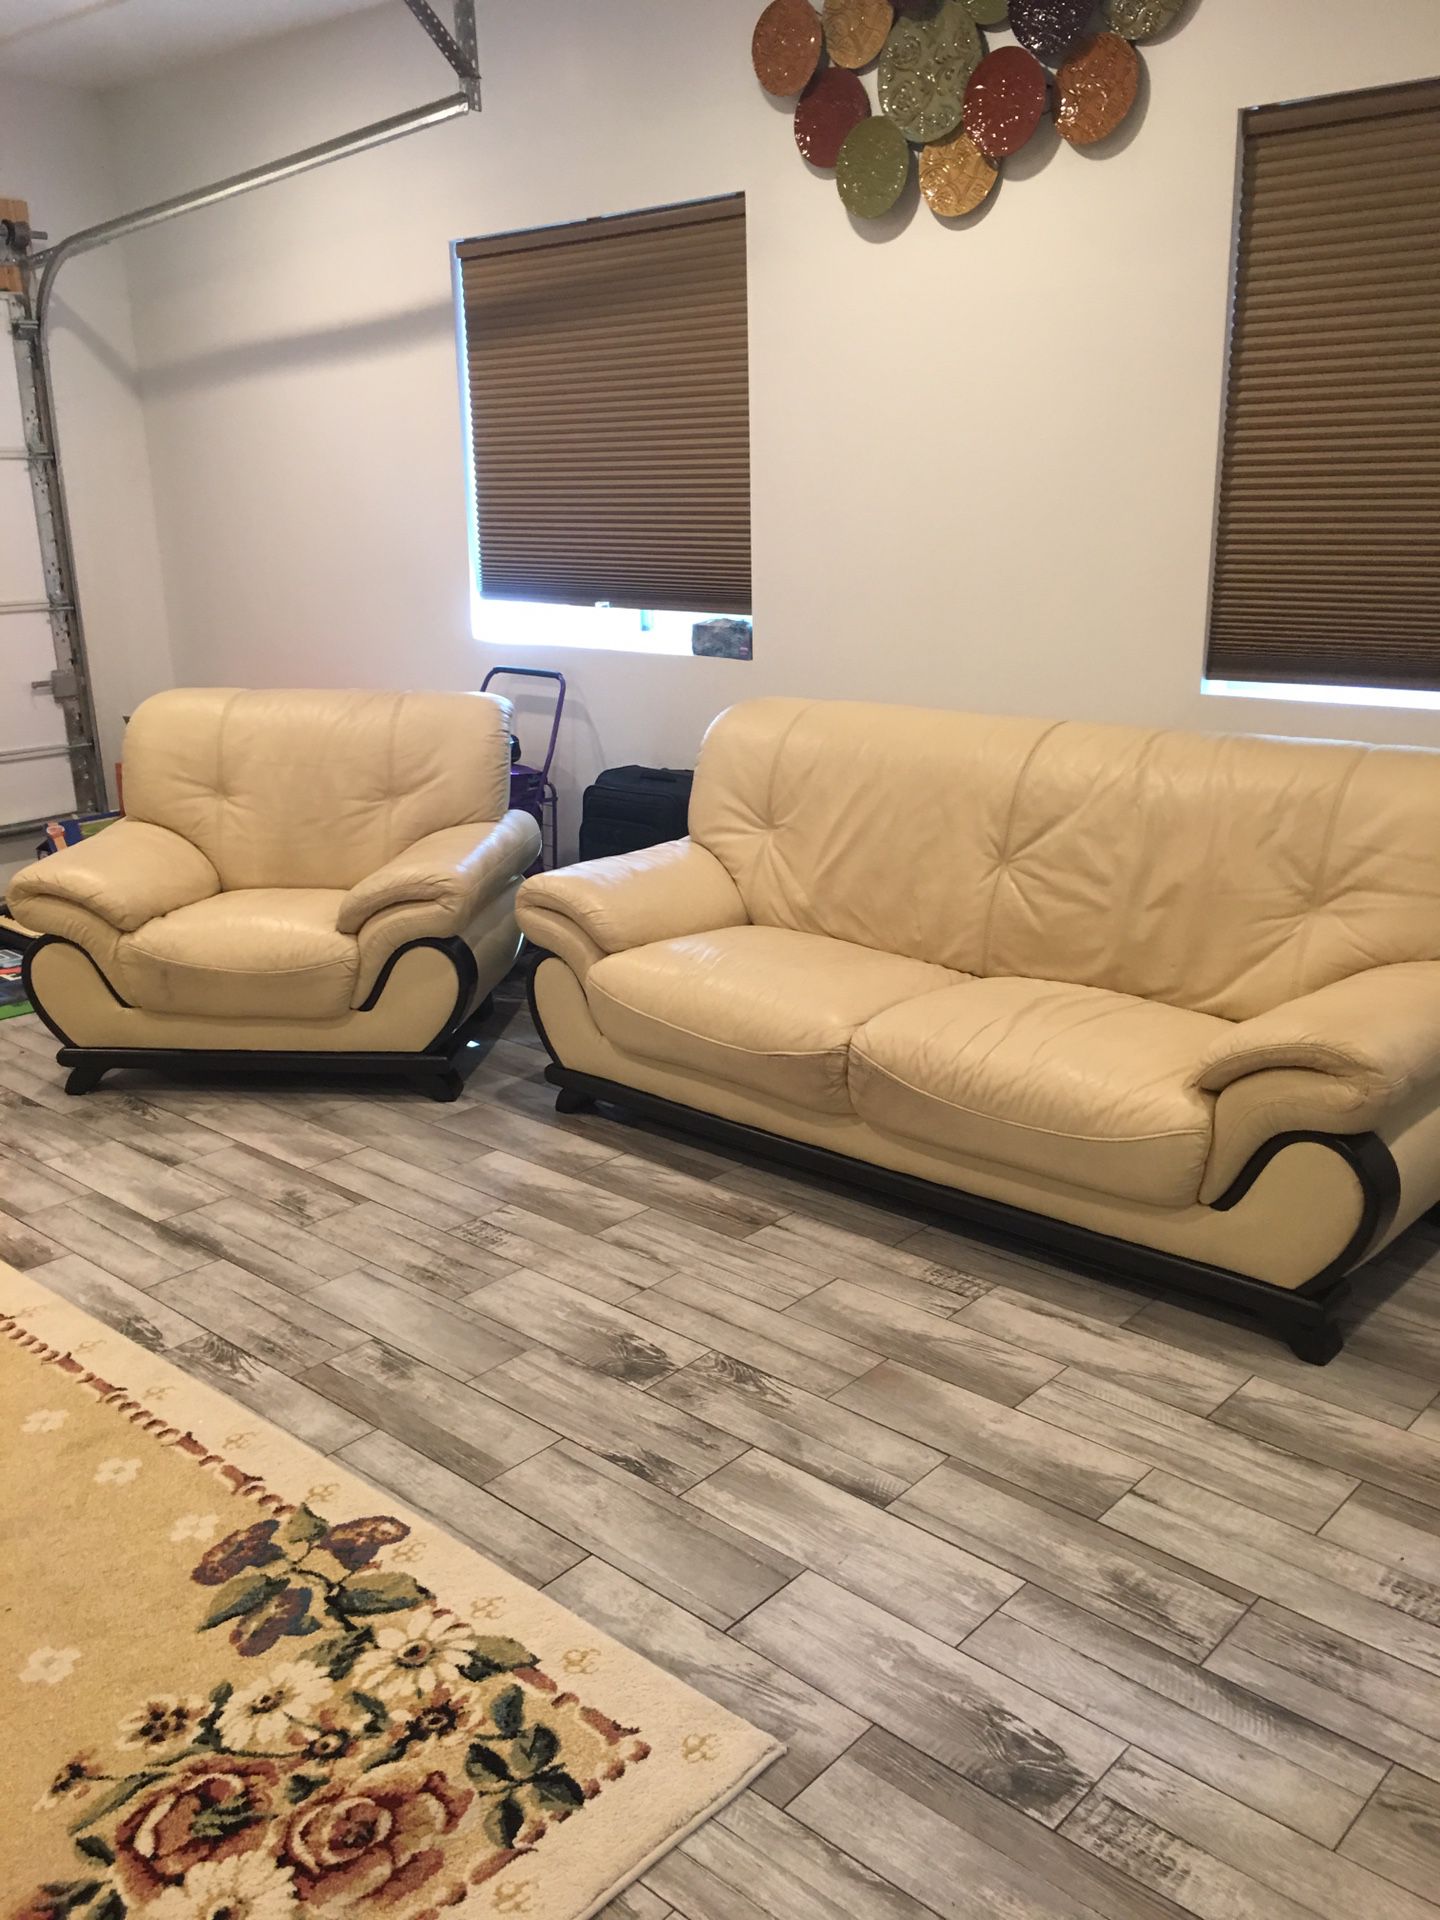 Cream leather couch and chair